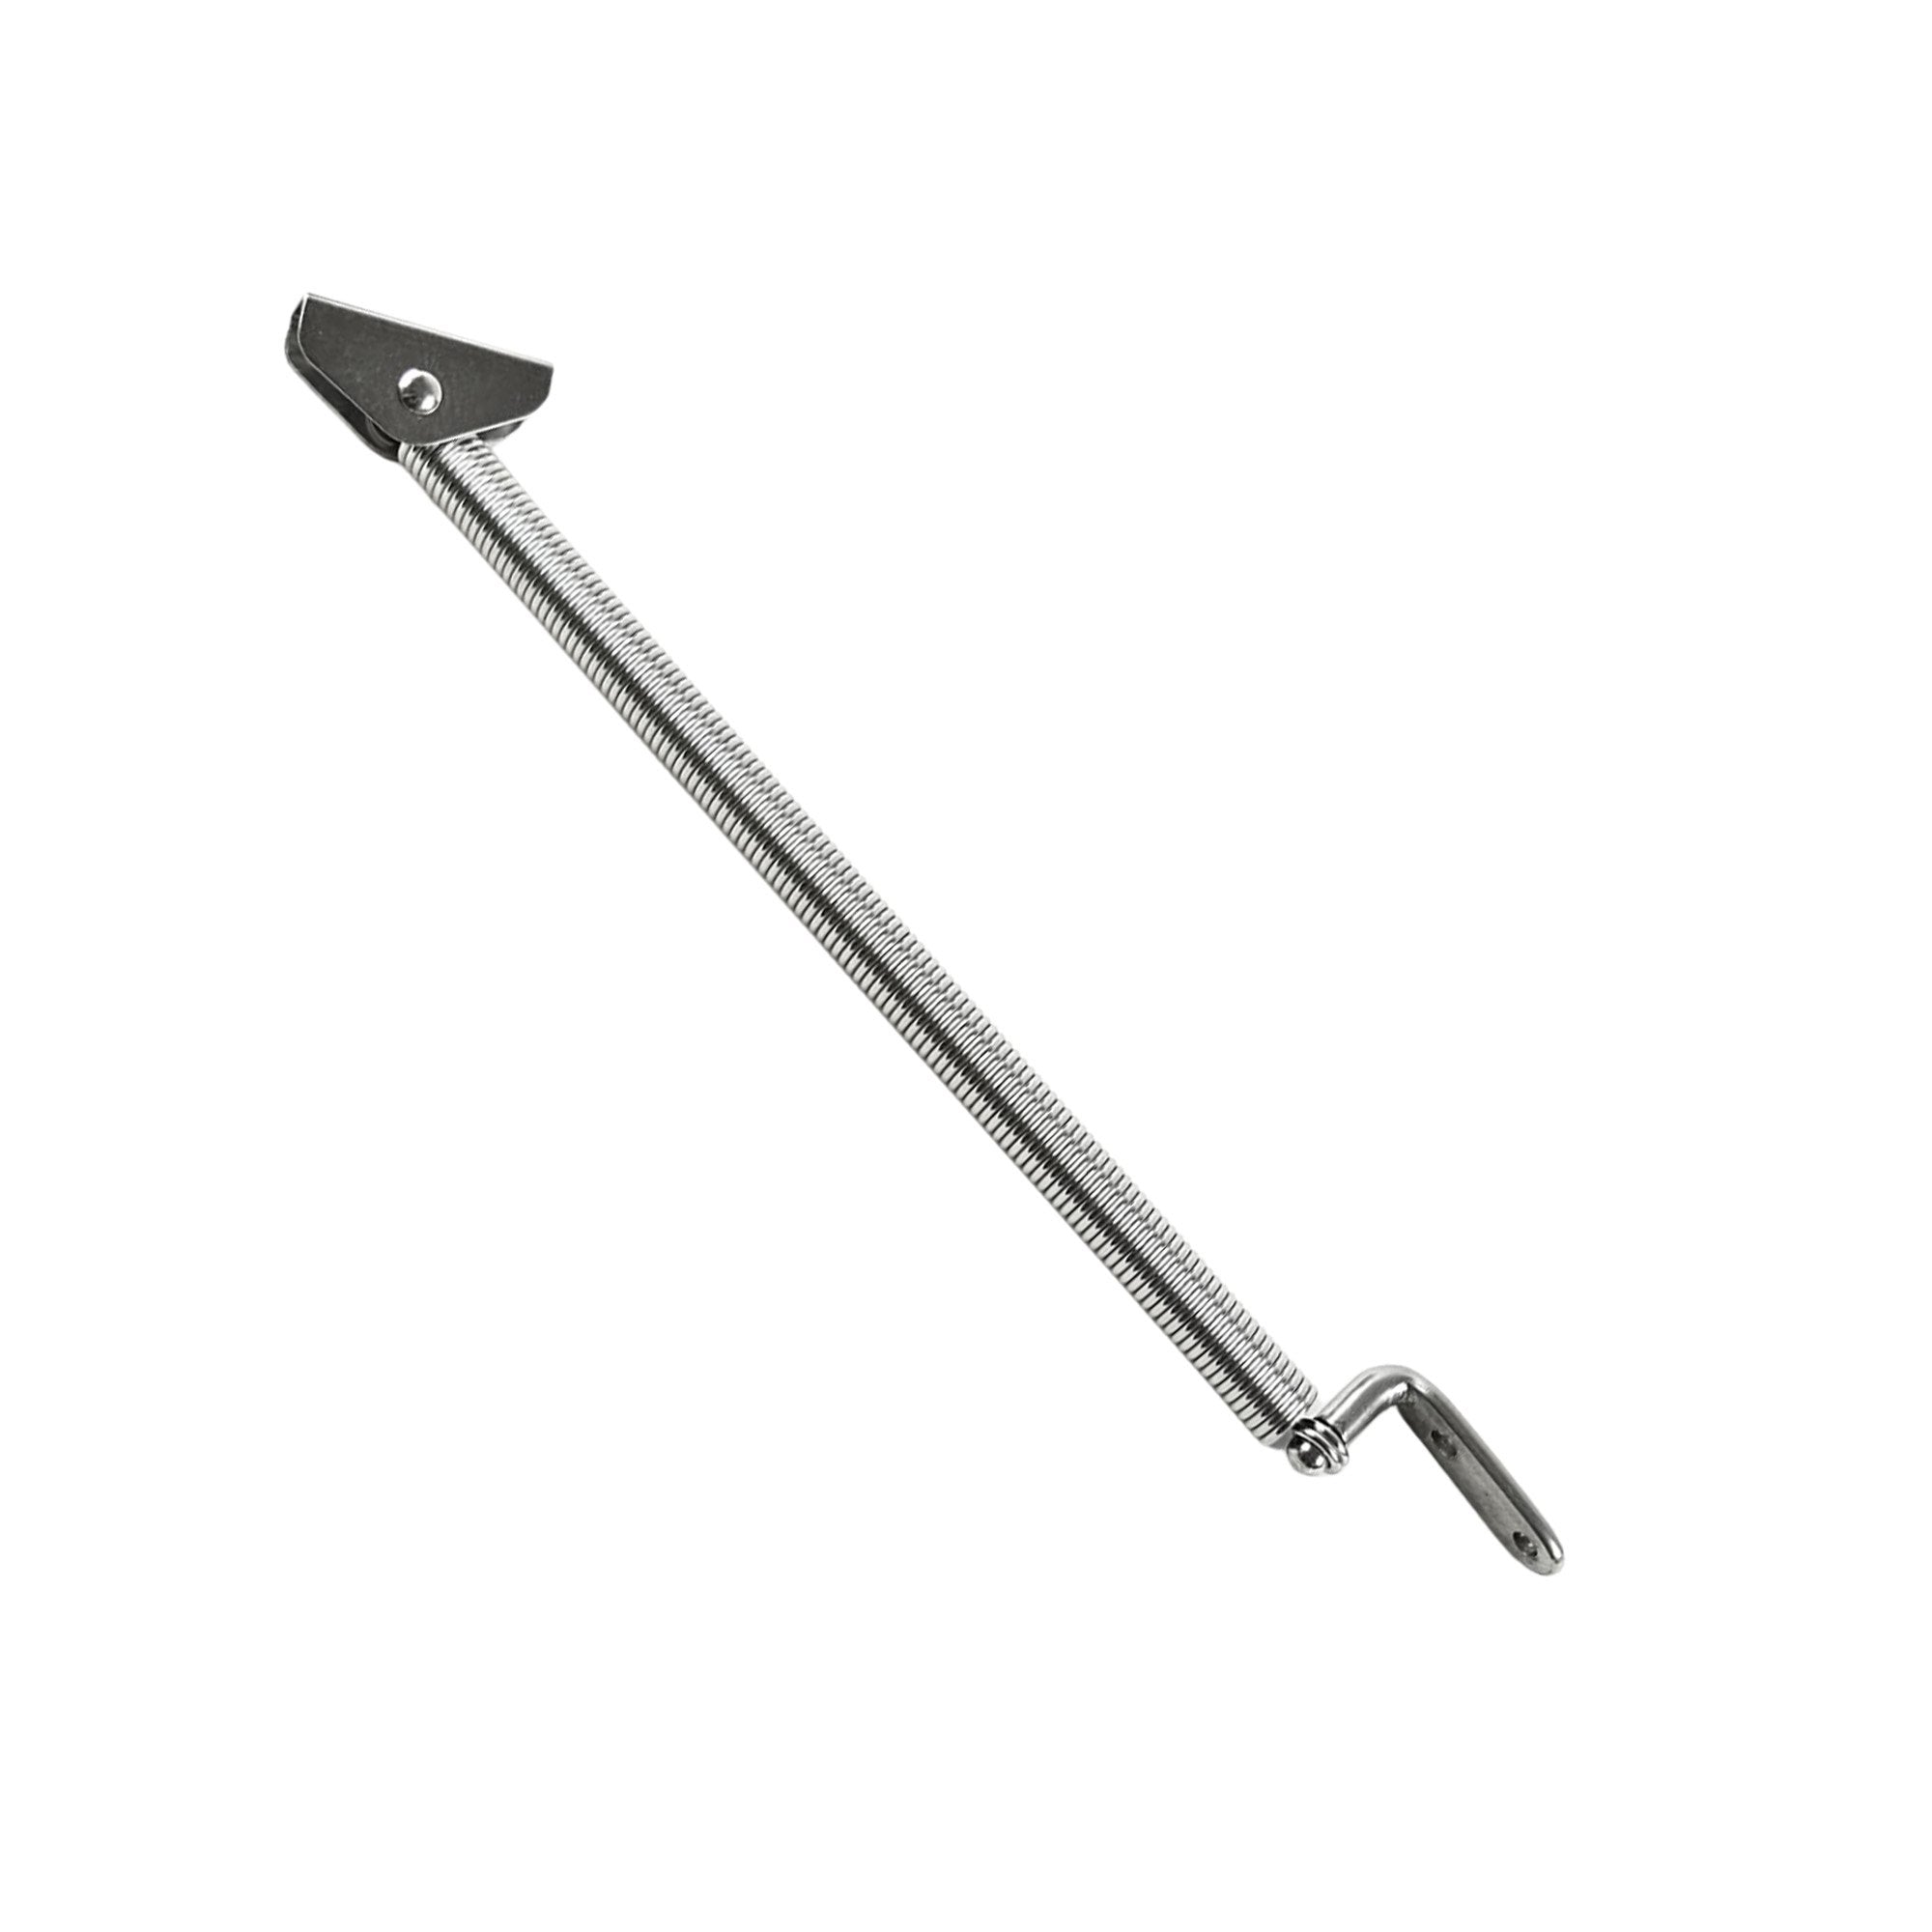 Marine City Stainless-Steel Hatch Spring Adjuster with U-Bolt and L-Shape Plate 8-1/4 inches or 10-1/4 inches (Length: 10-1/4 inches)